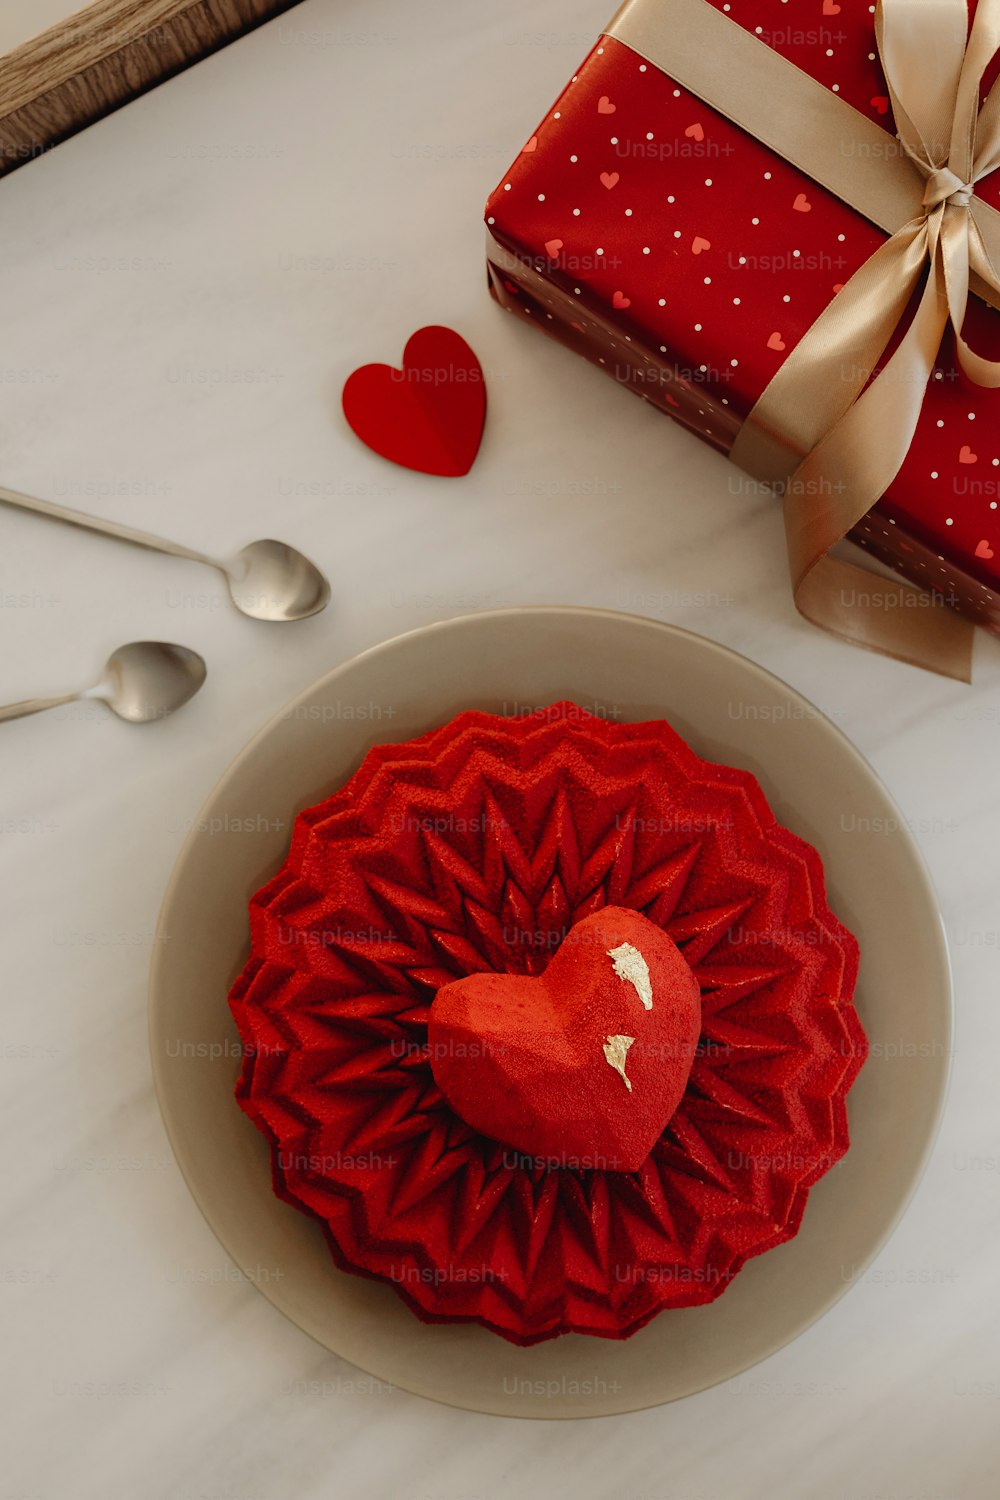 a heart shaped cake sitting on top of a white plate